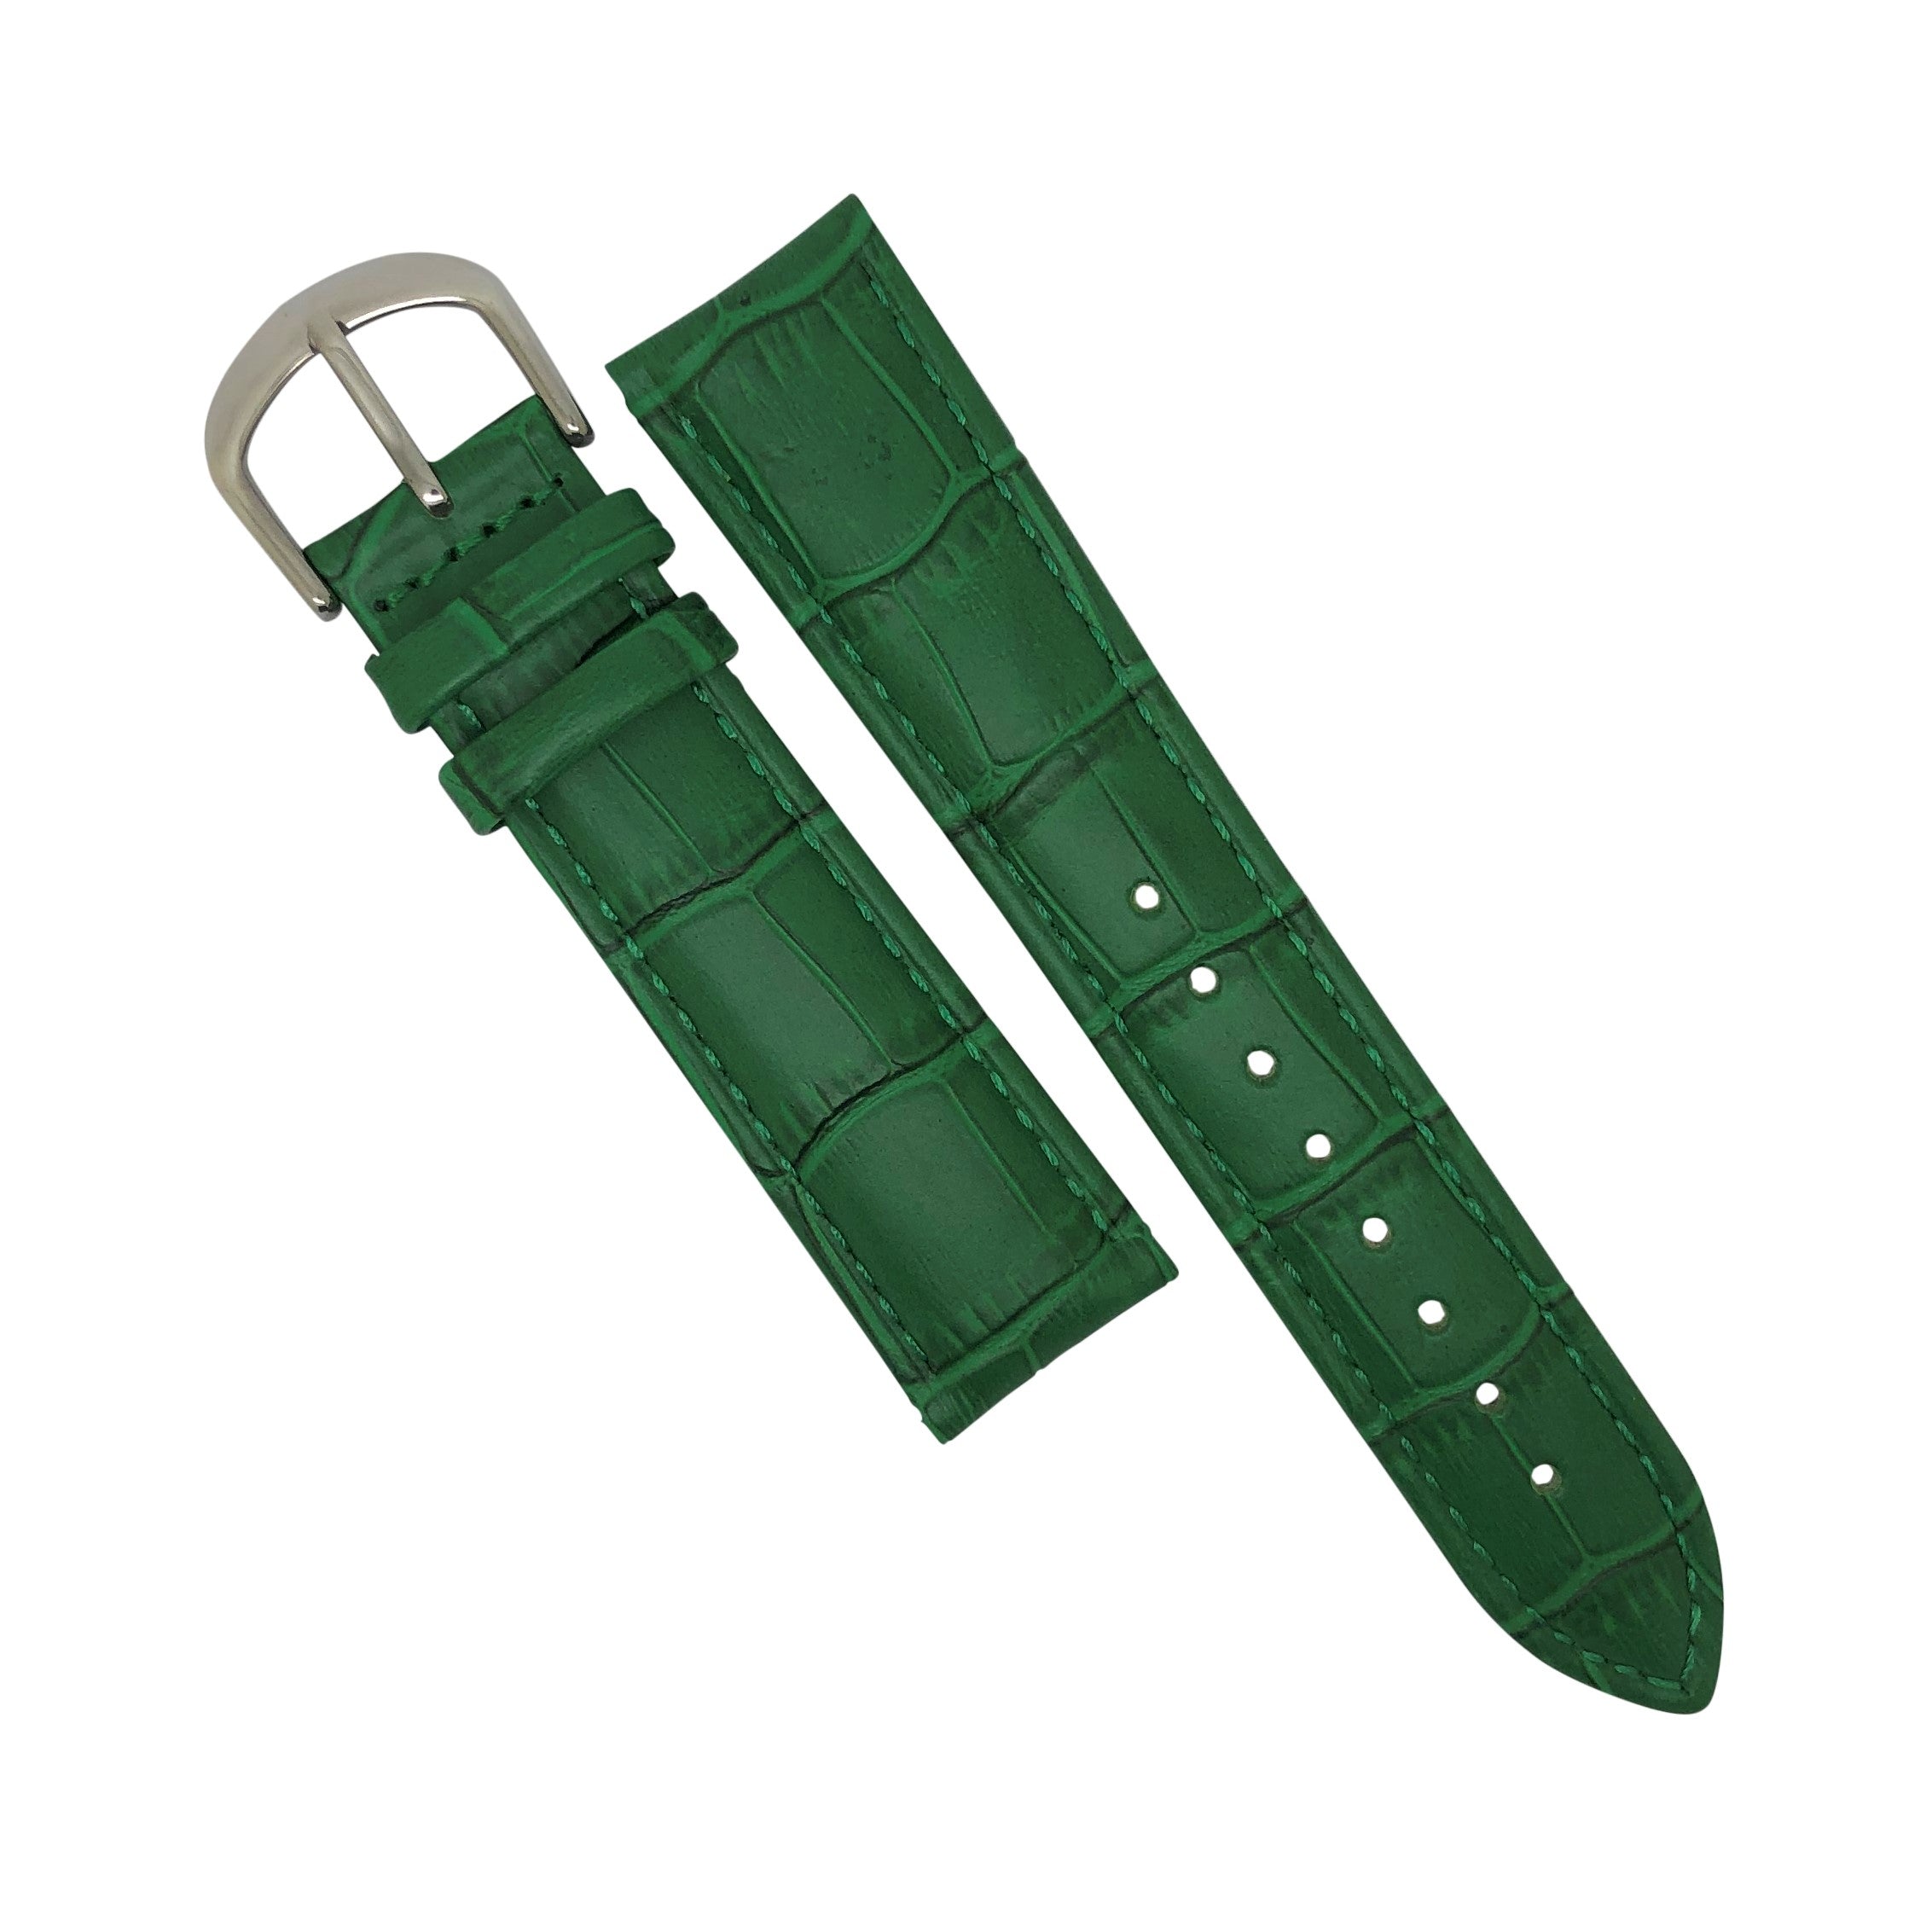 Genuine Croc Pattern Stitched Leather Watch Strap in Green with Silver Buckle (12mm) - Nomad Watch Works Malaysia